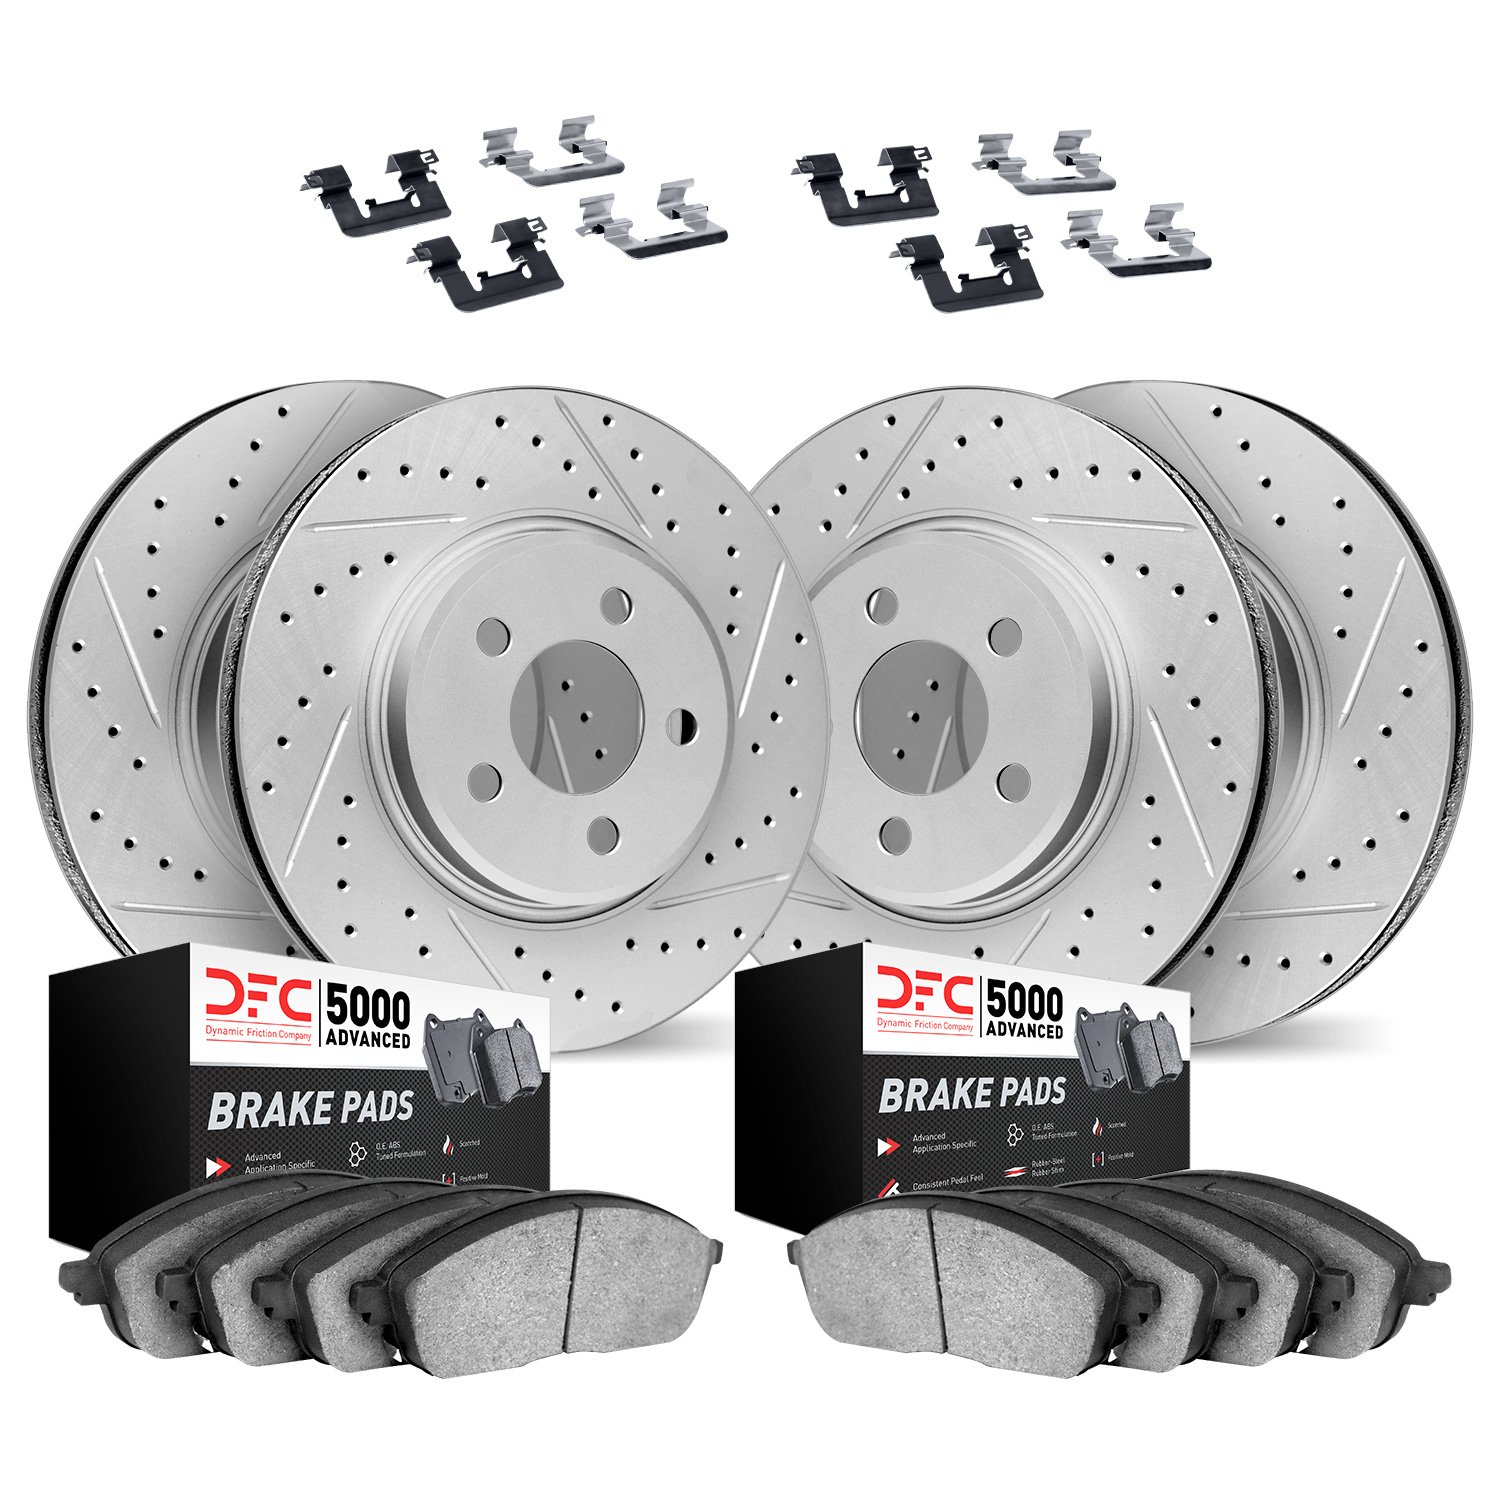 2514-27011 Geoperformance Drilled/Slotted Rotors w/5000 Advanced Brake Pads Kit & Hardware, 2007-2015 Volvo, Position: Front and